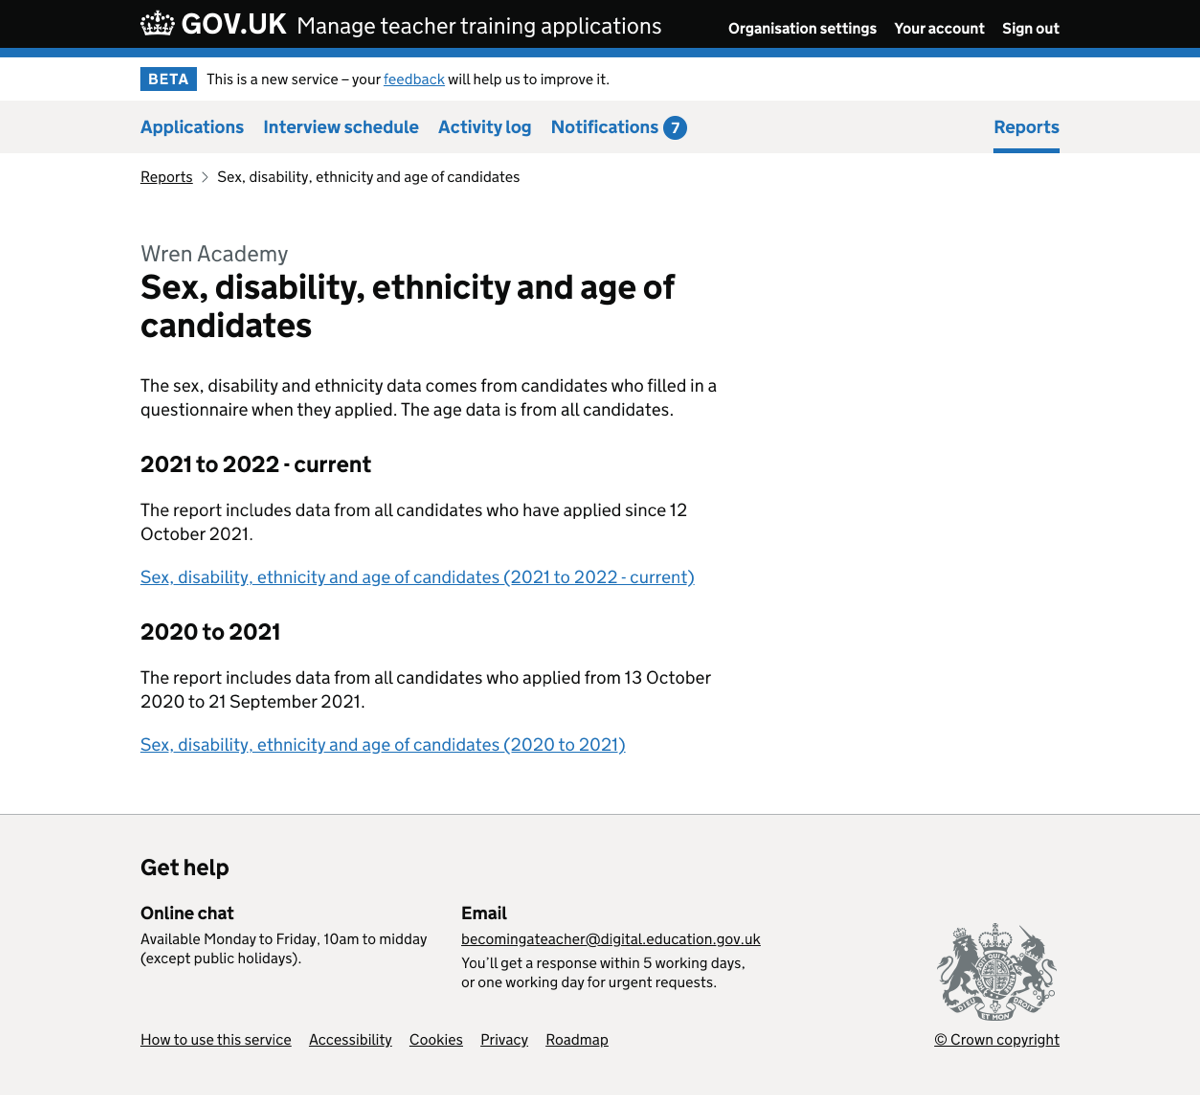 Candidate sex, disability, ethnicity and age report - interstitial